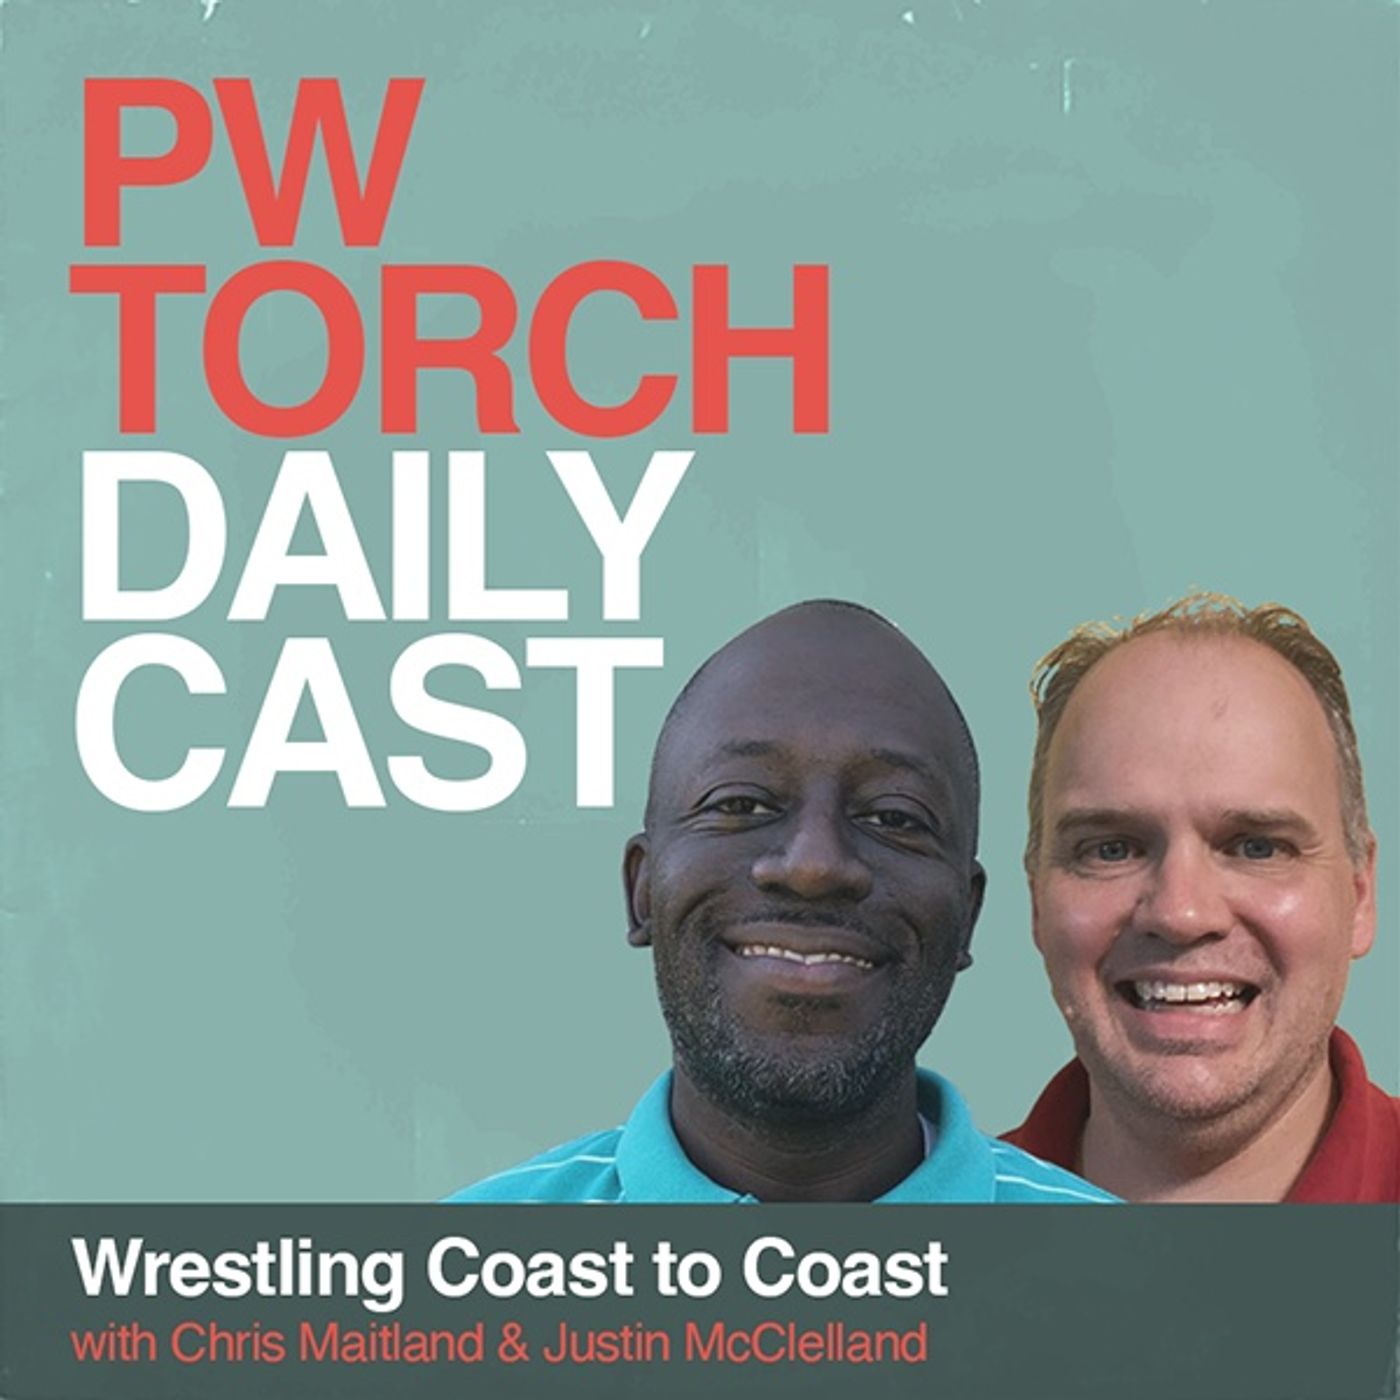 PWTorch Dailycast – Wrestling Coast to Coast - Maitland & McClelland provide a live report from Wrestling Revolver Thursday